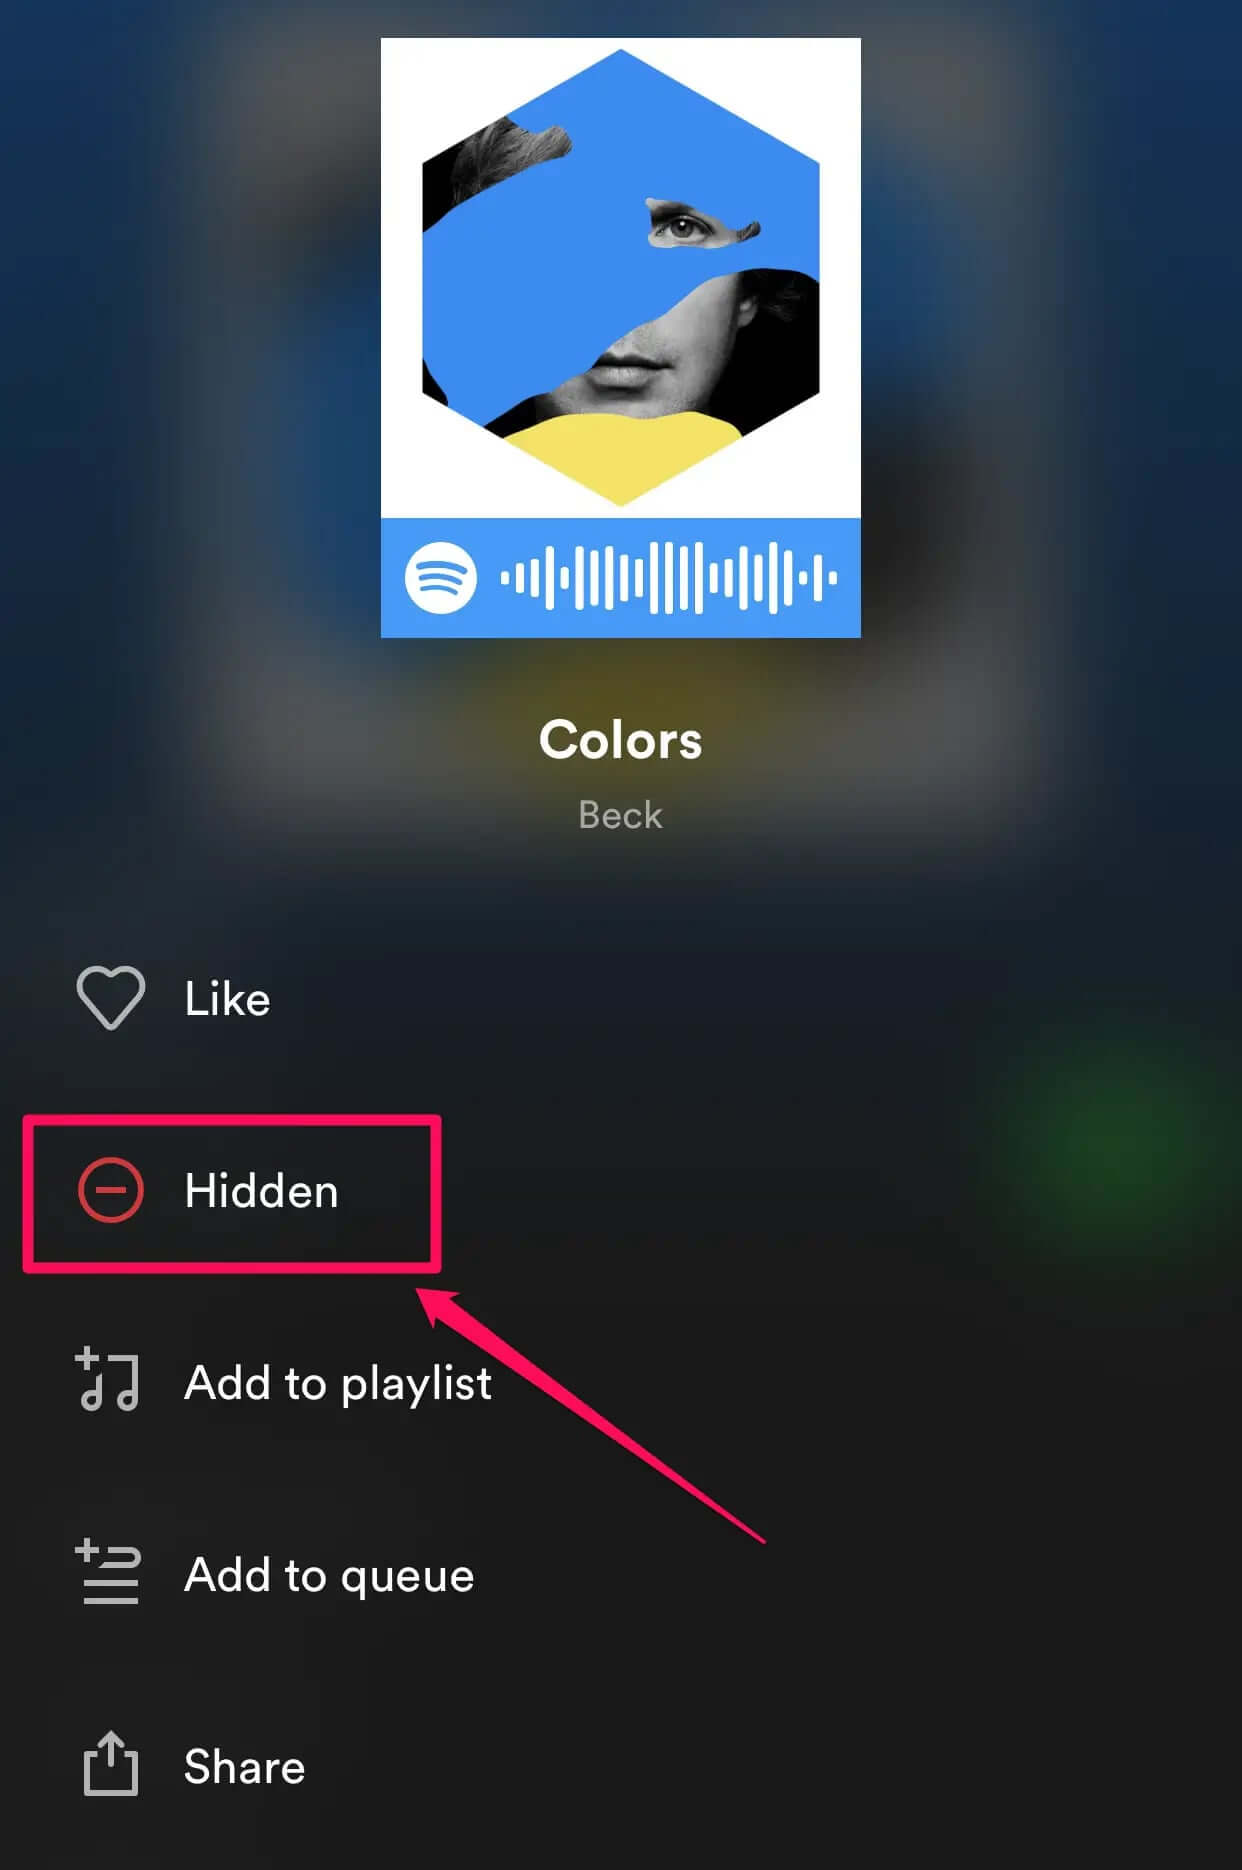  how-to-unhide-a-song-on-spotify  